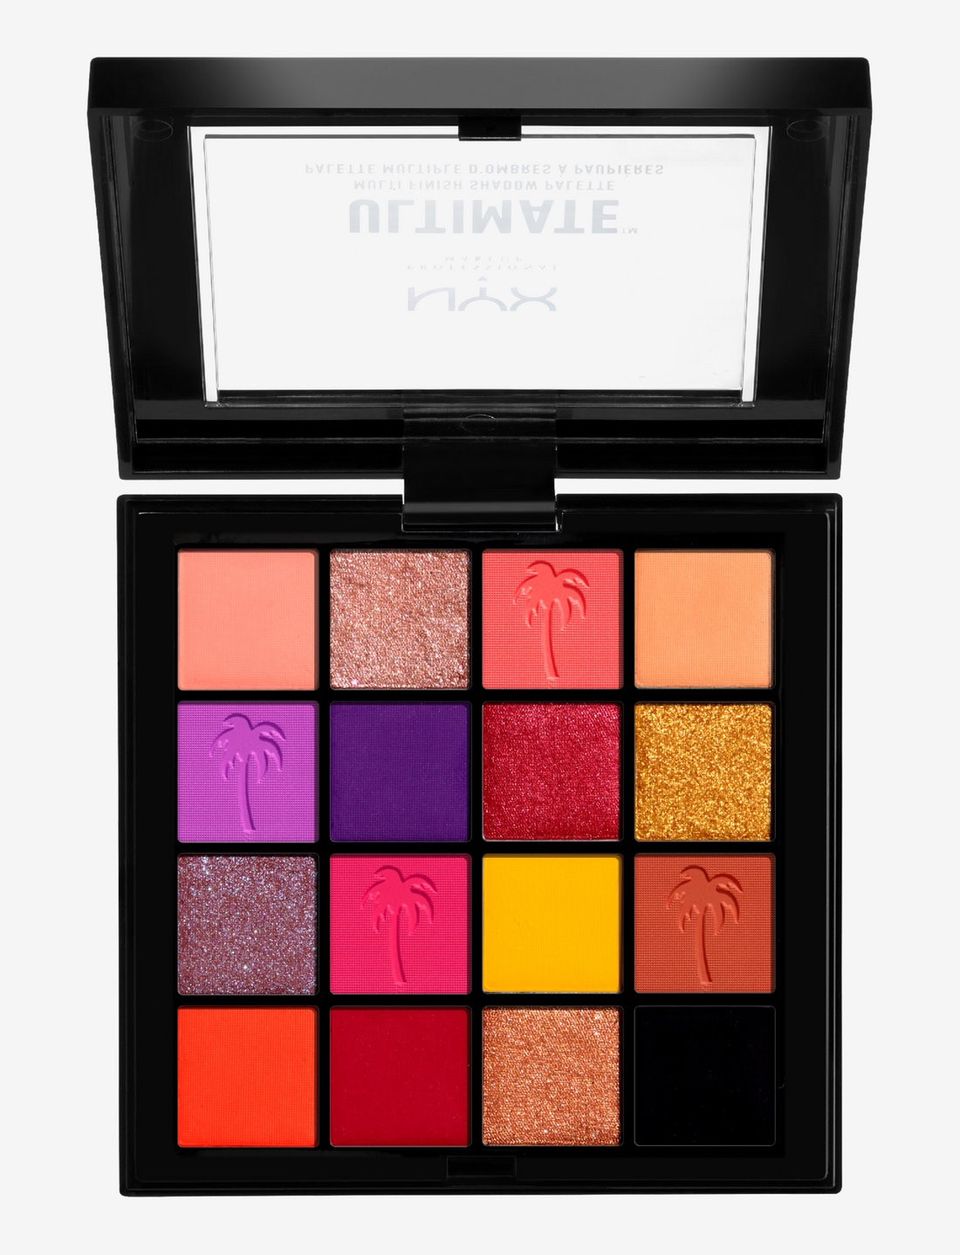 NYX PROFESSIONAL MAKEUP Ultimate Shadow Palette Festival